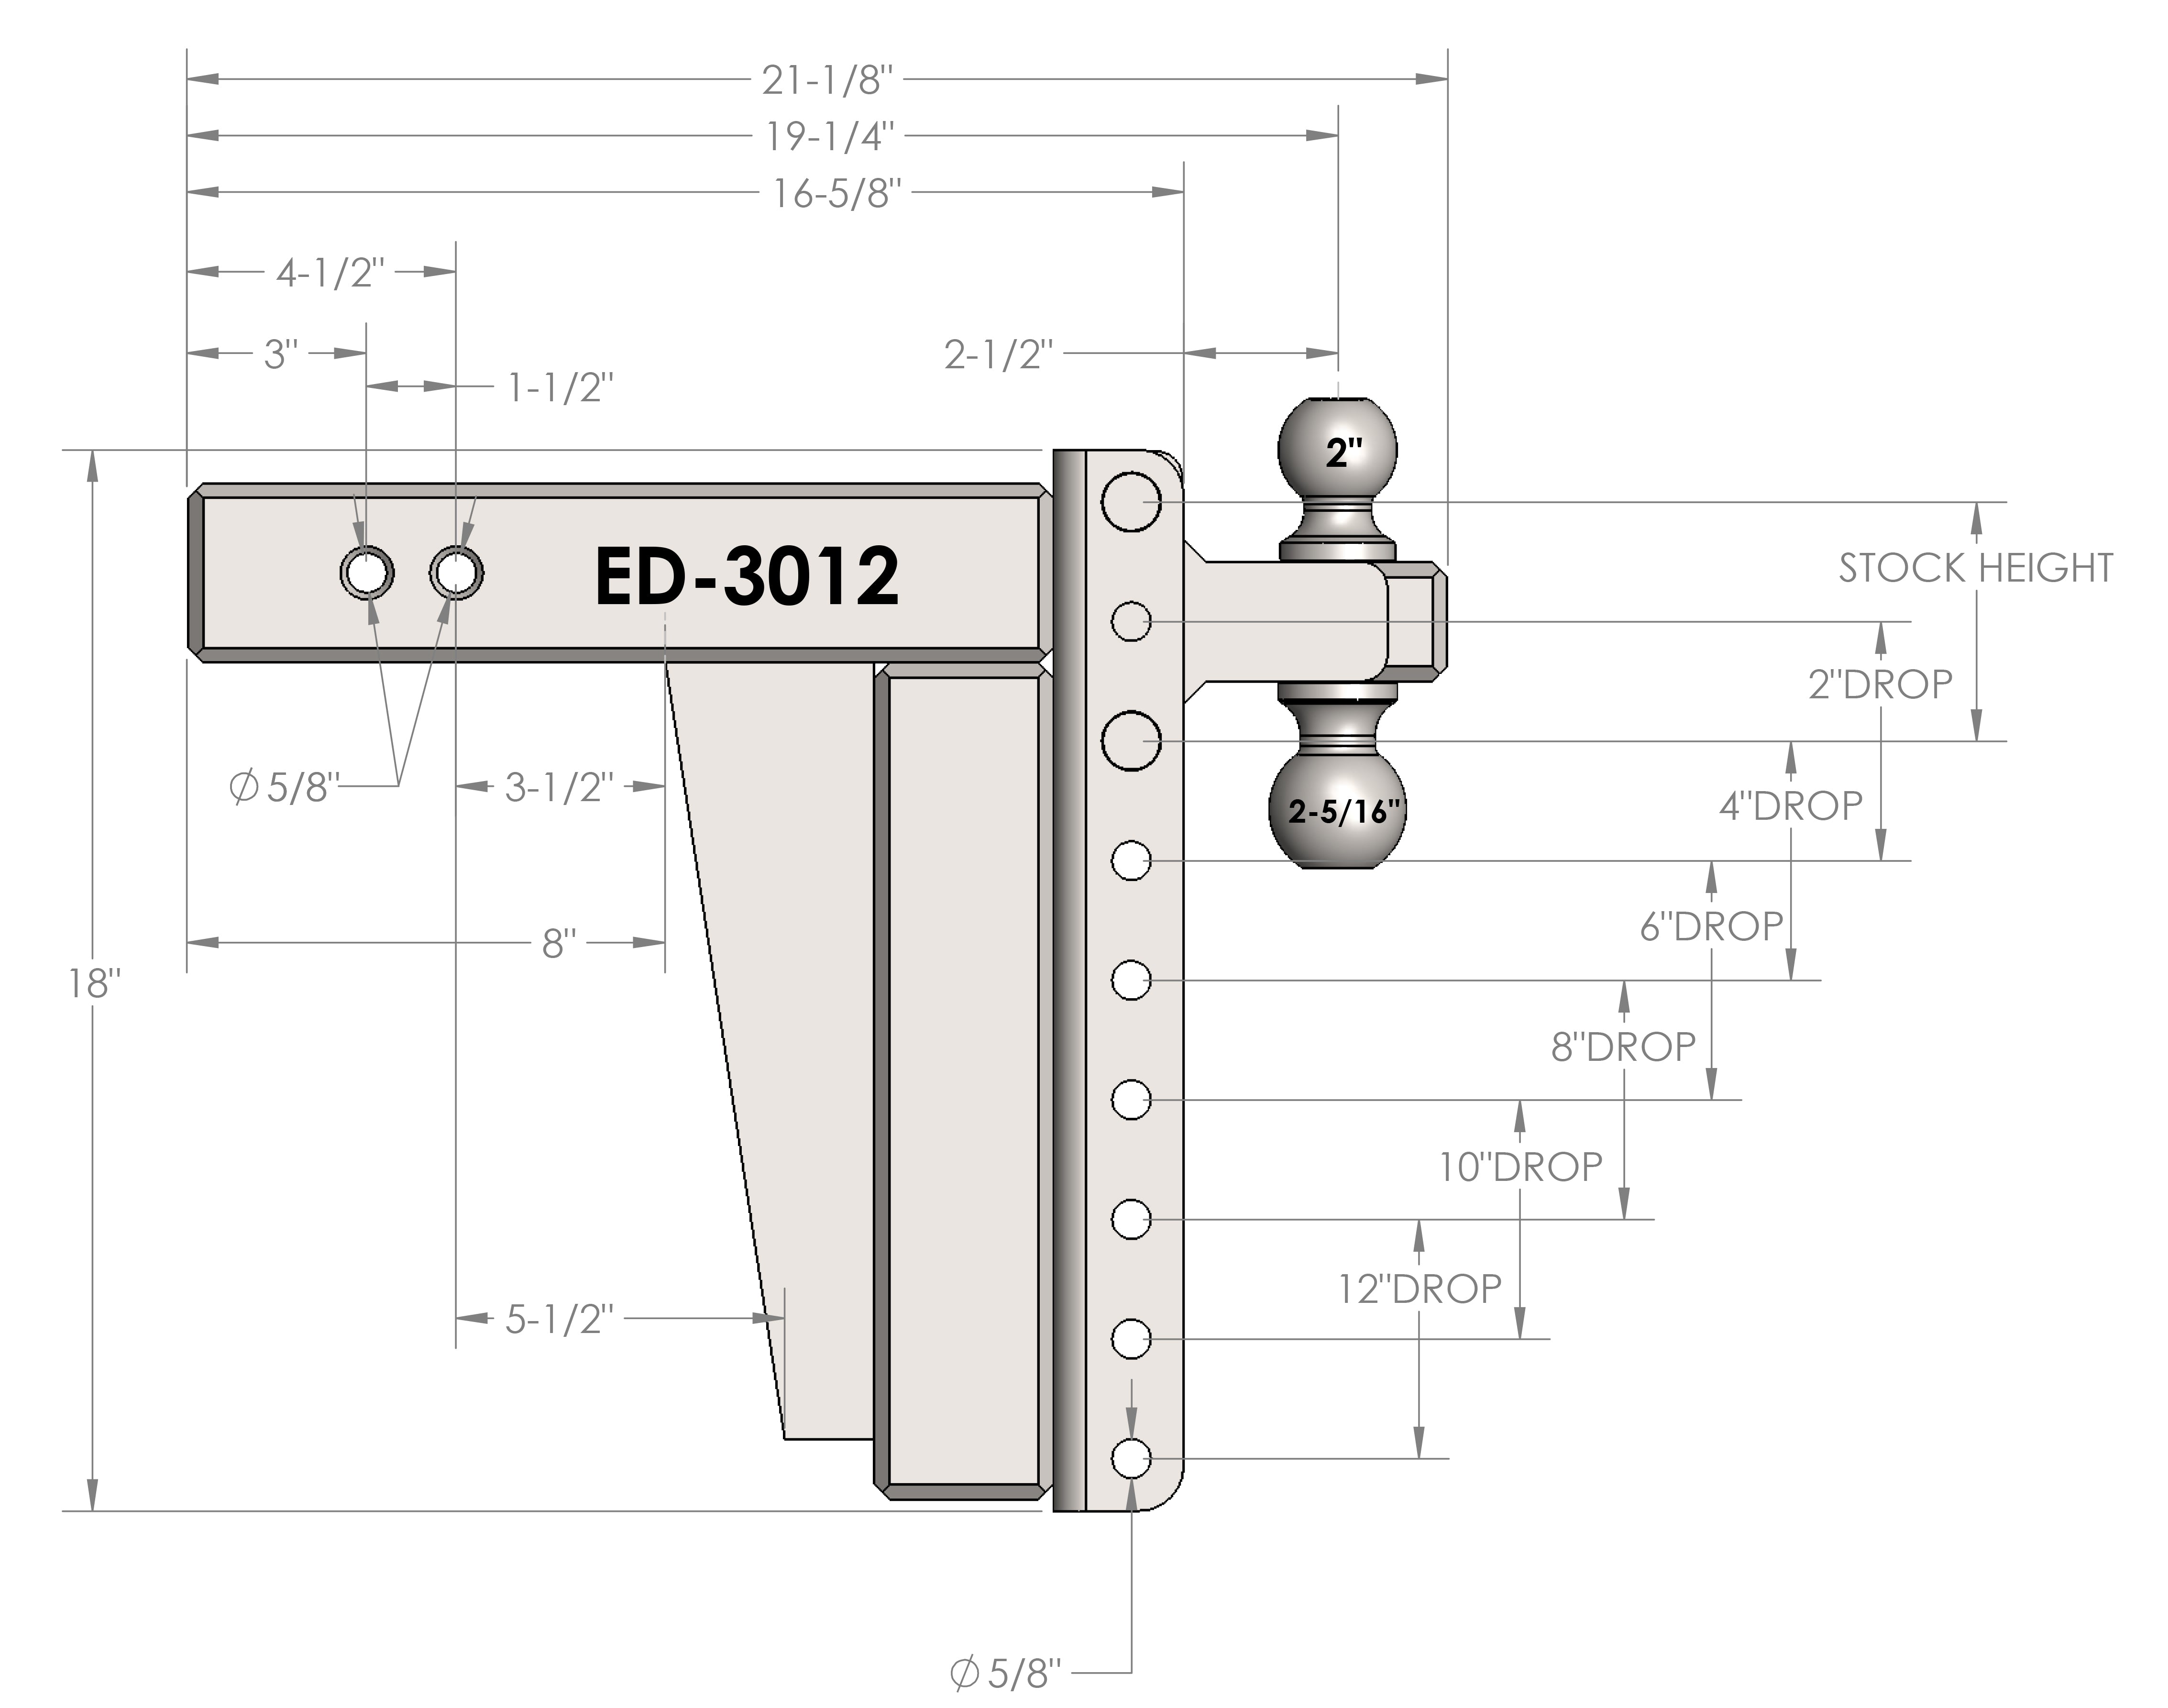 3.0" Extreme Duty 12" Drop/Rise Hitch Design Specification